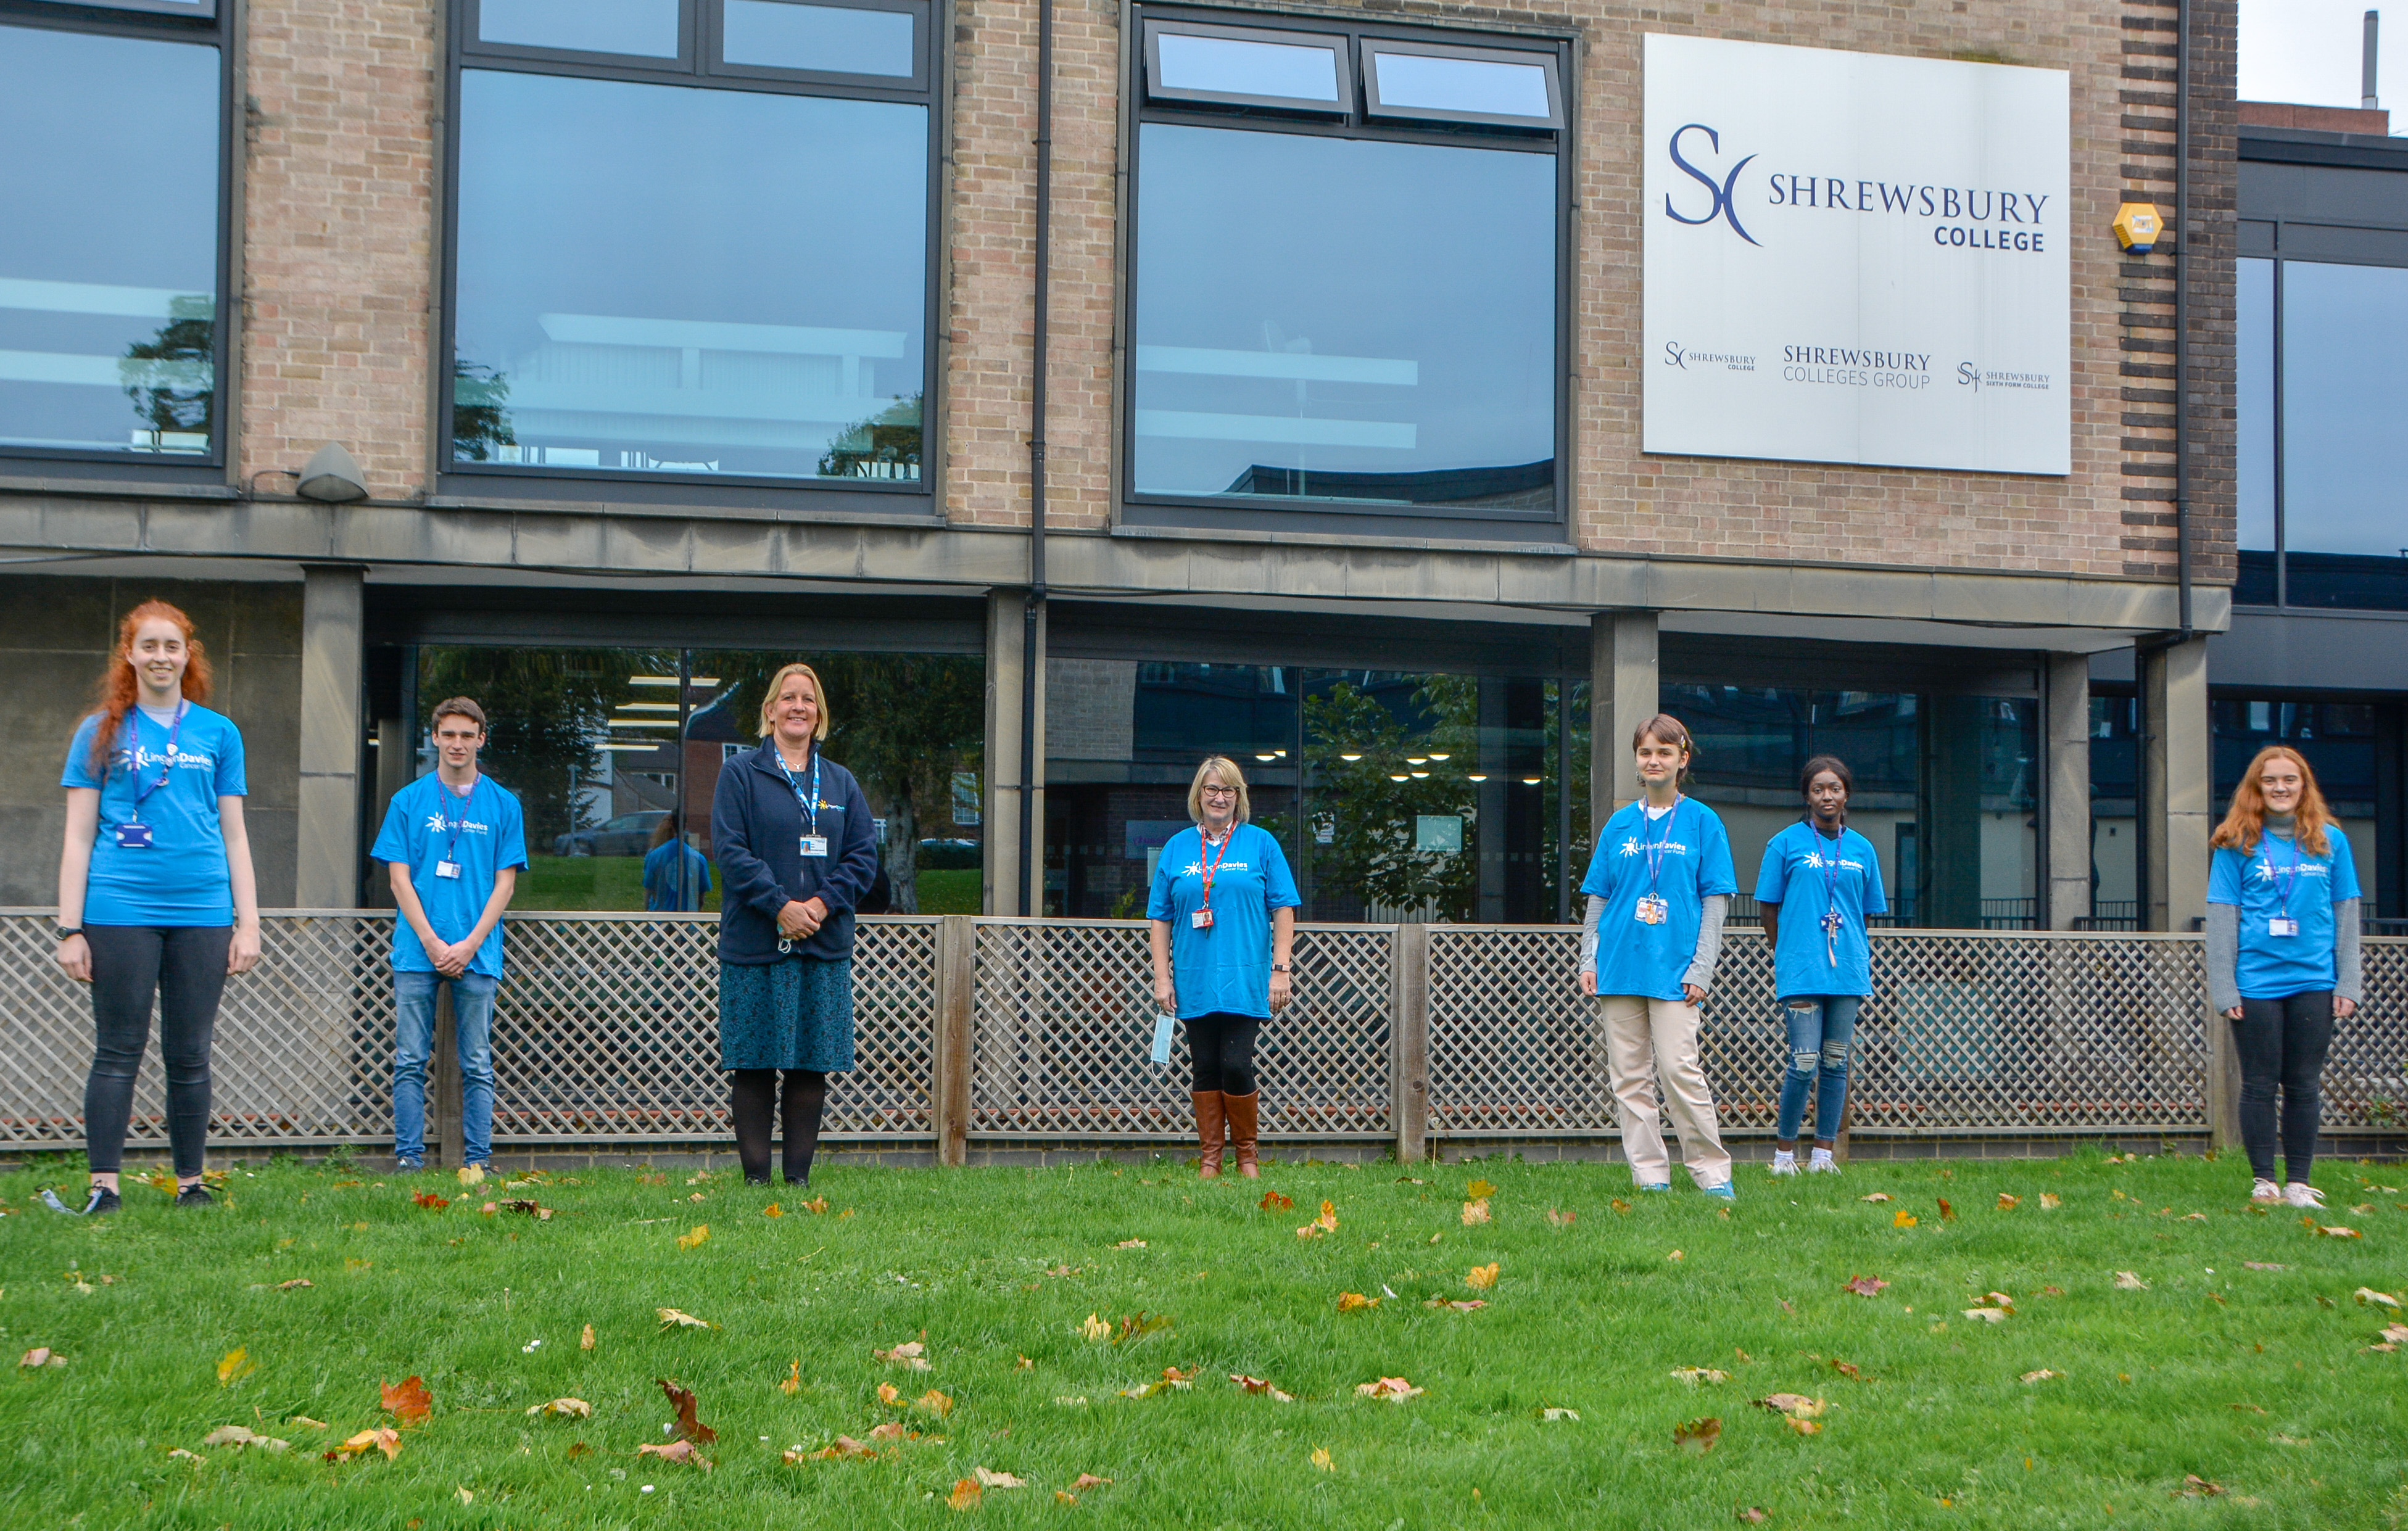 Student Union choose Lingen Davies as Charity of the Year